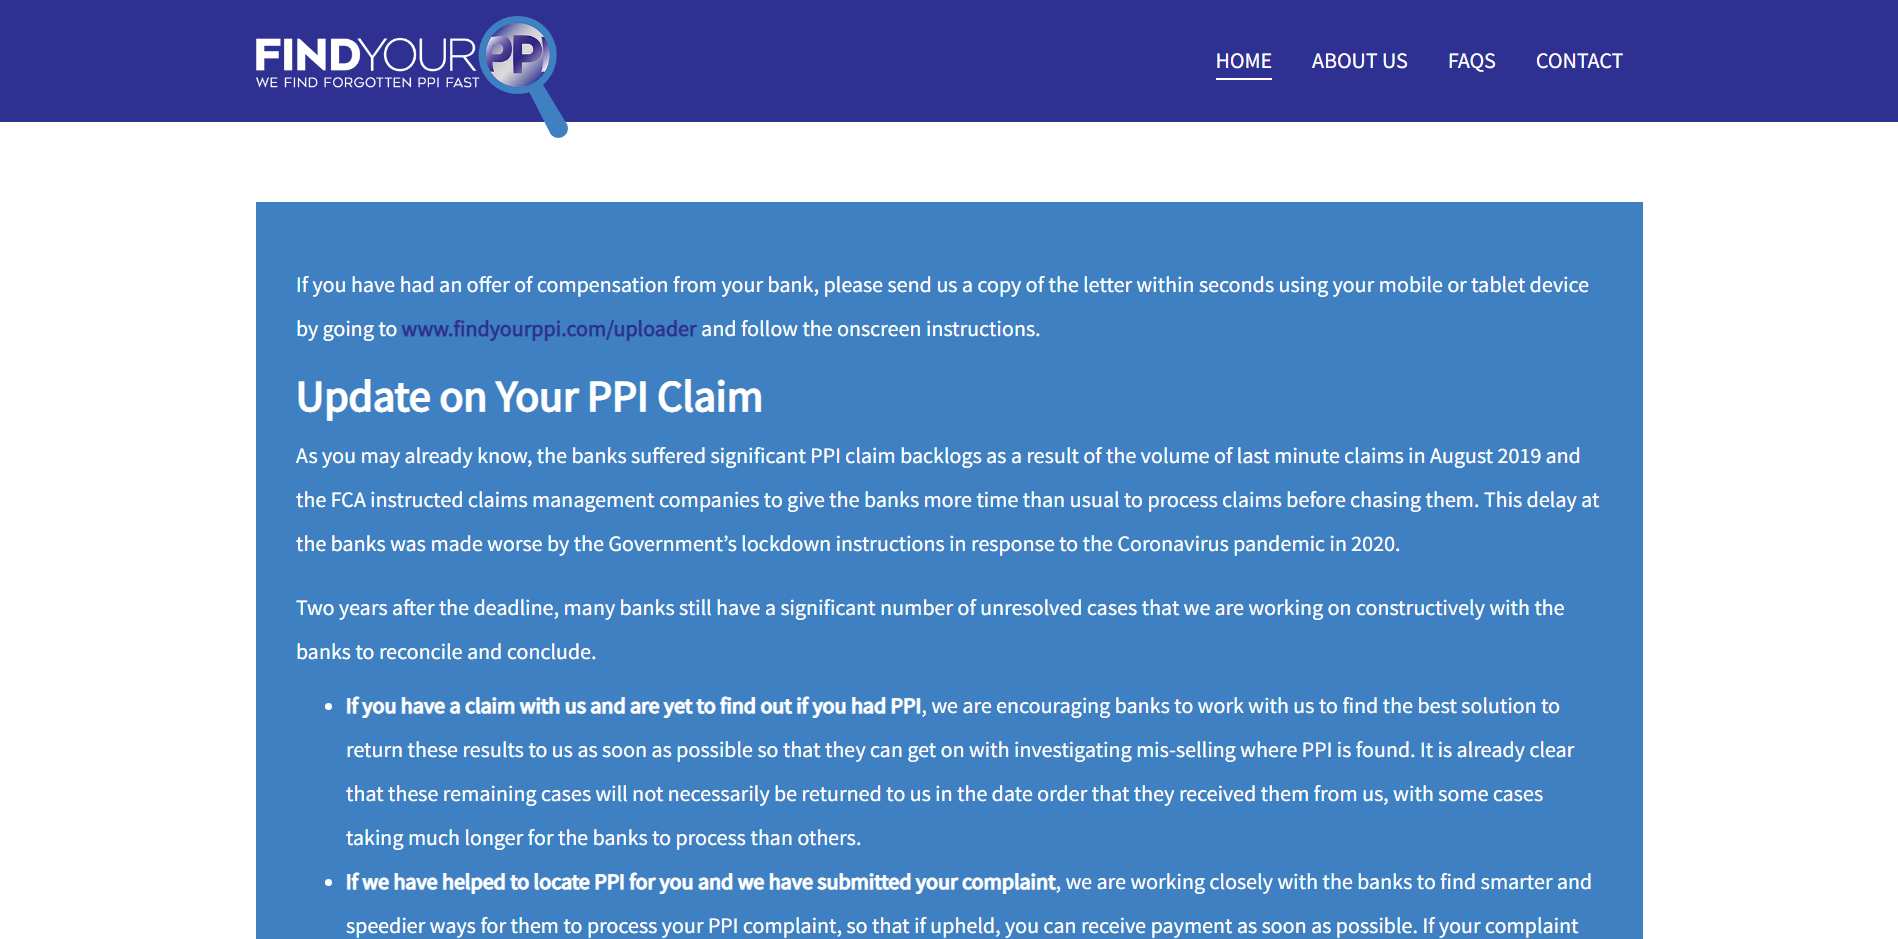 Find your PPI